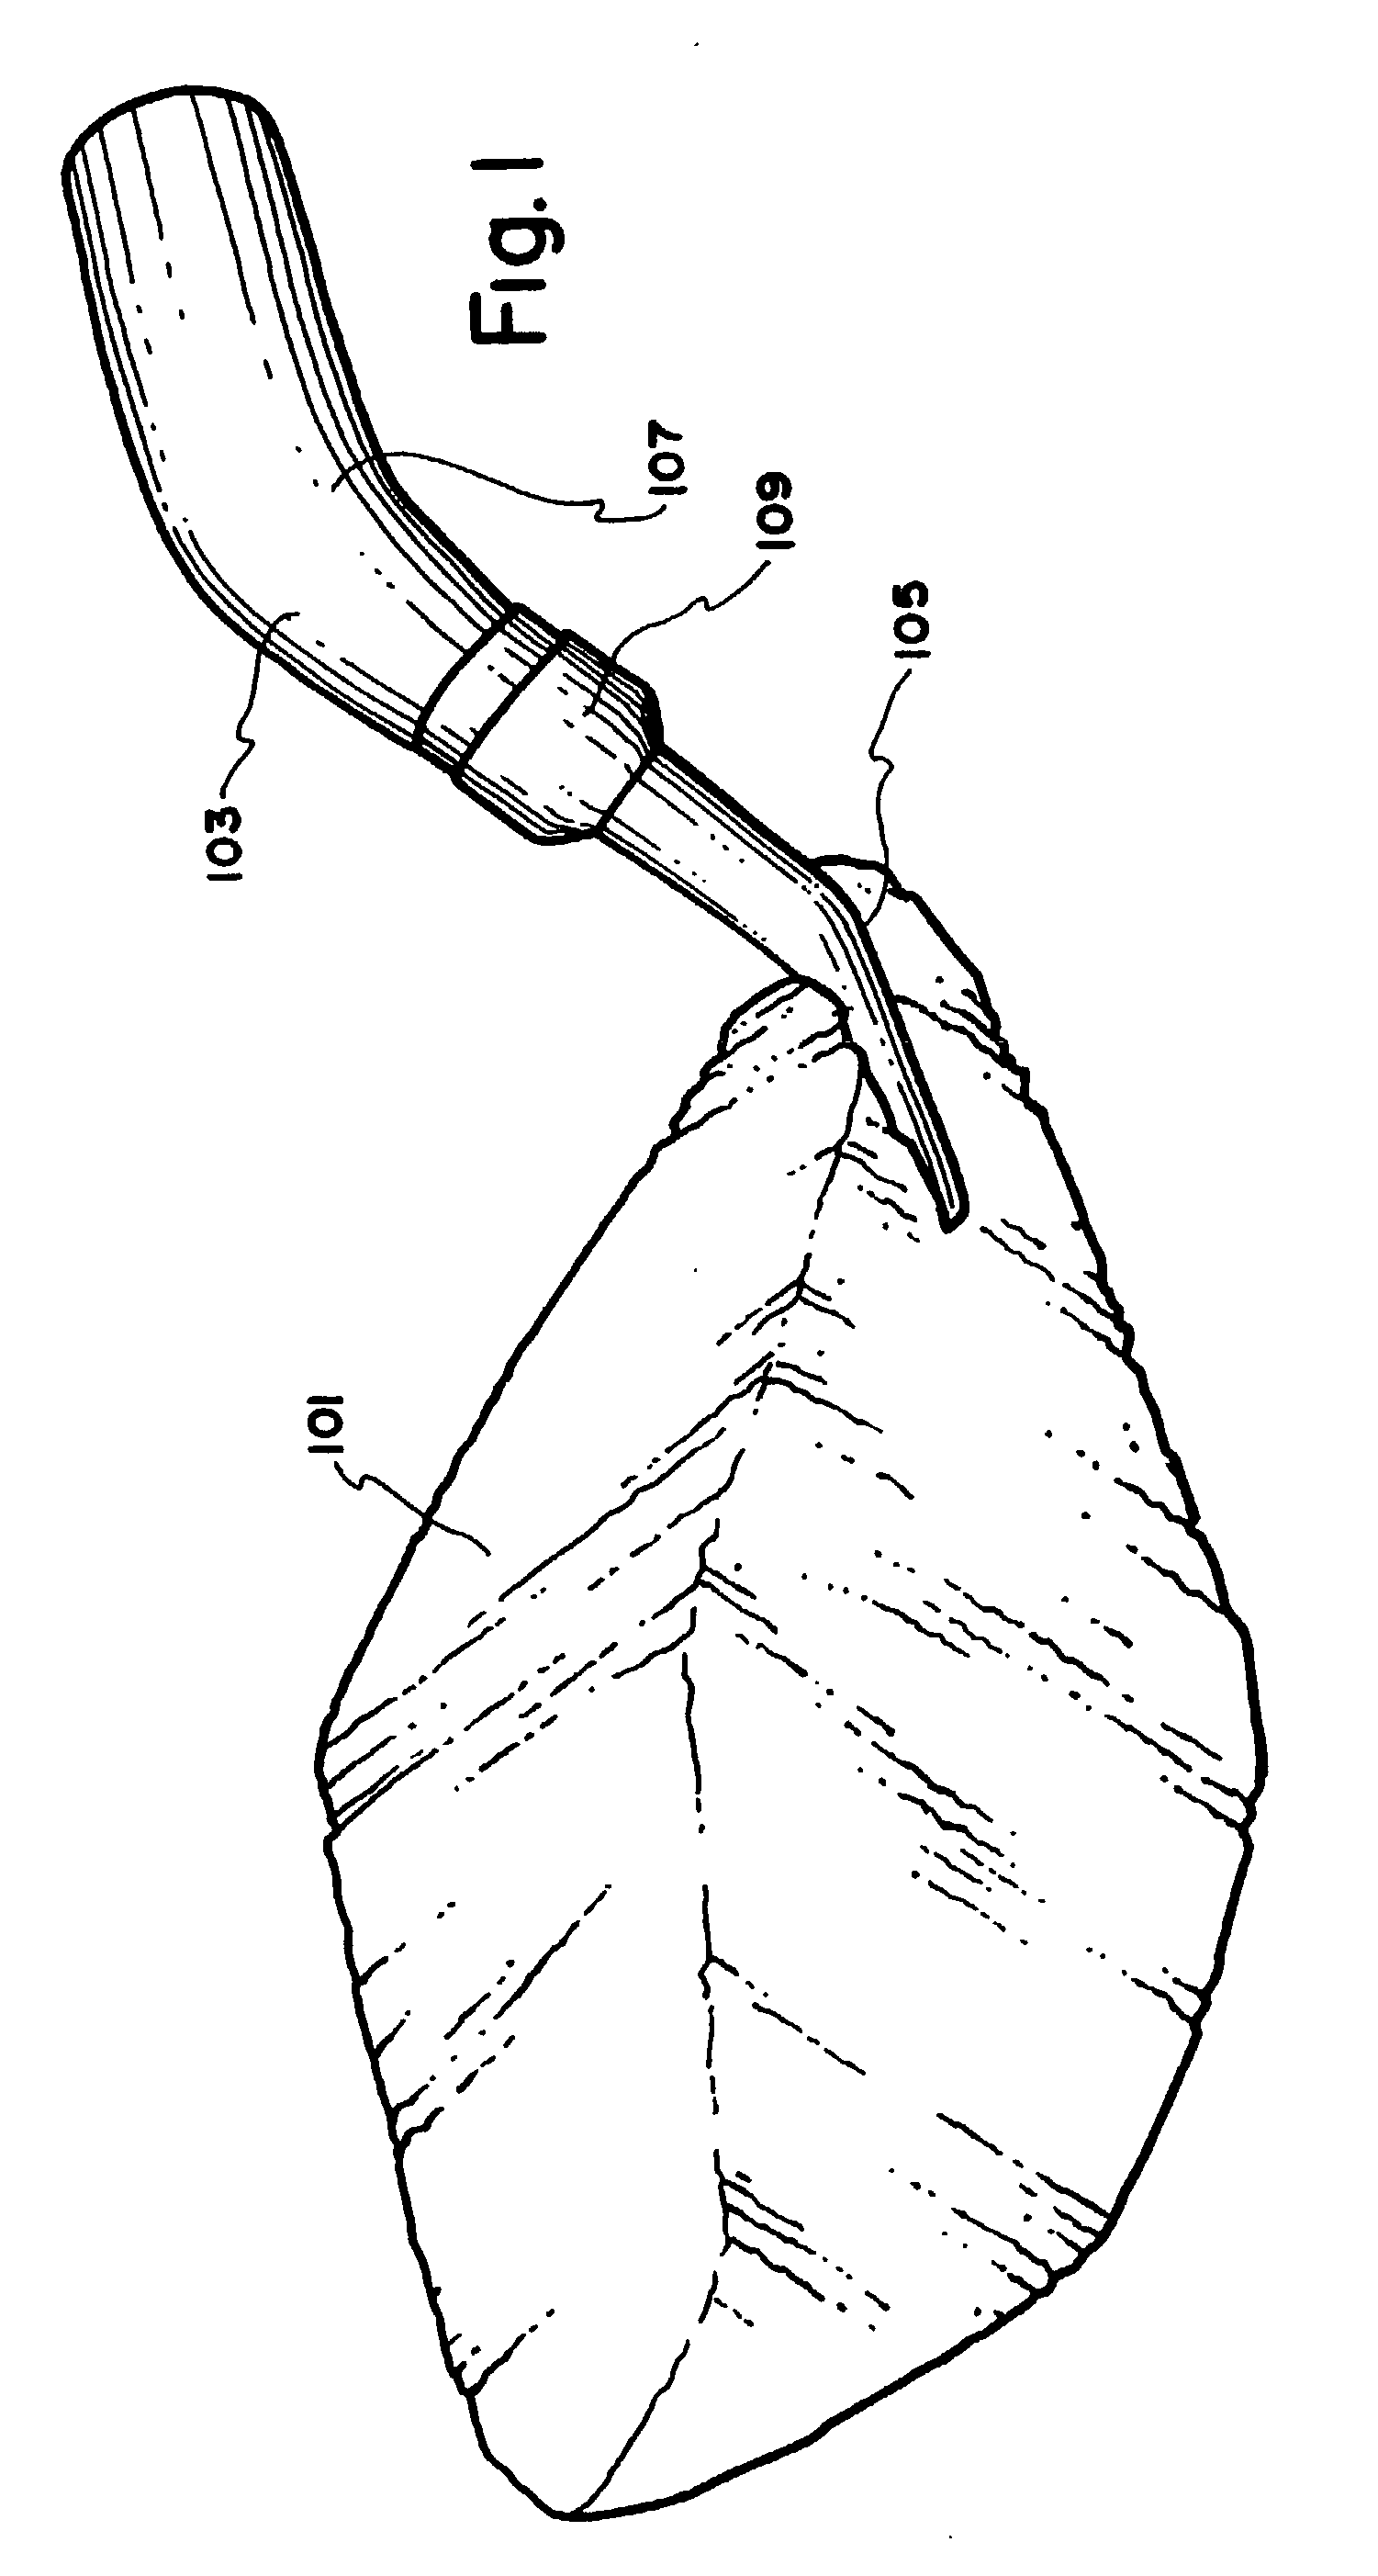 Method of manufacturing a composite golf club head